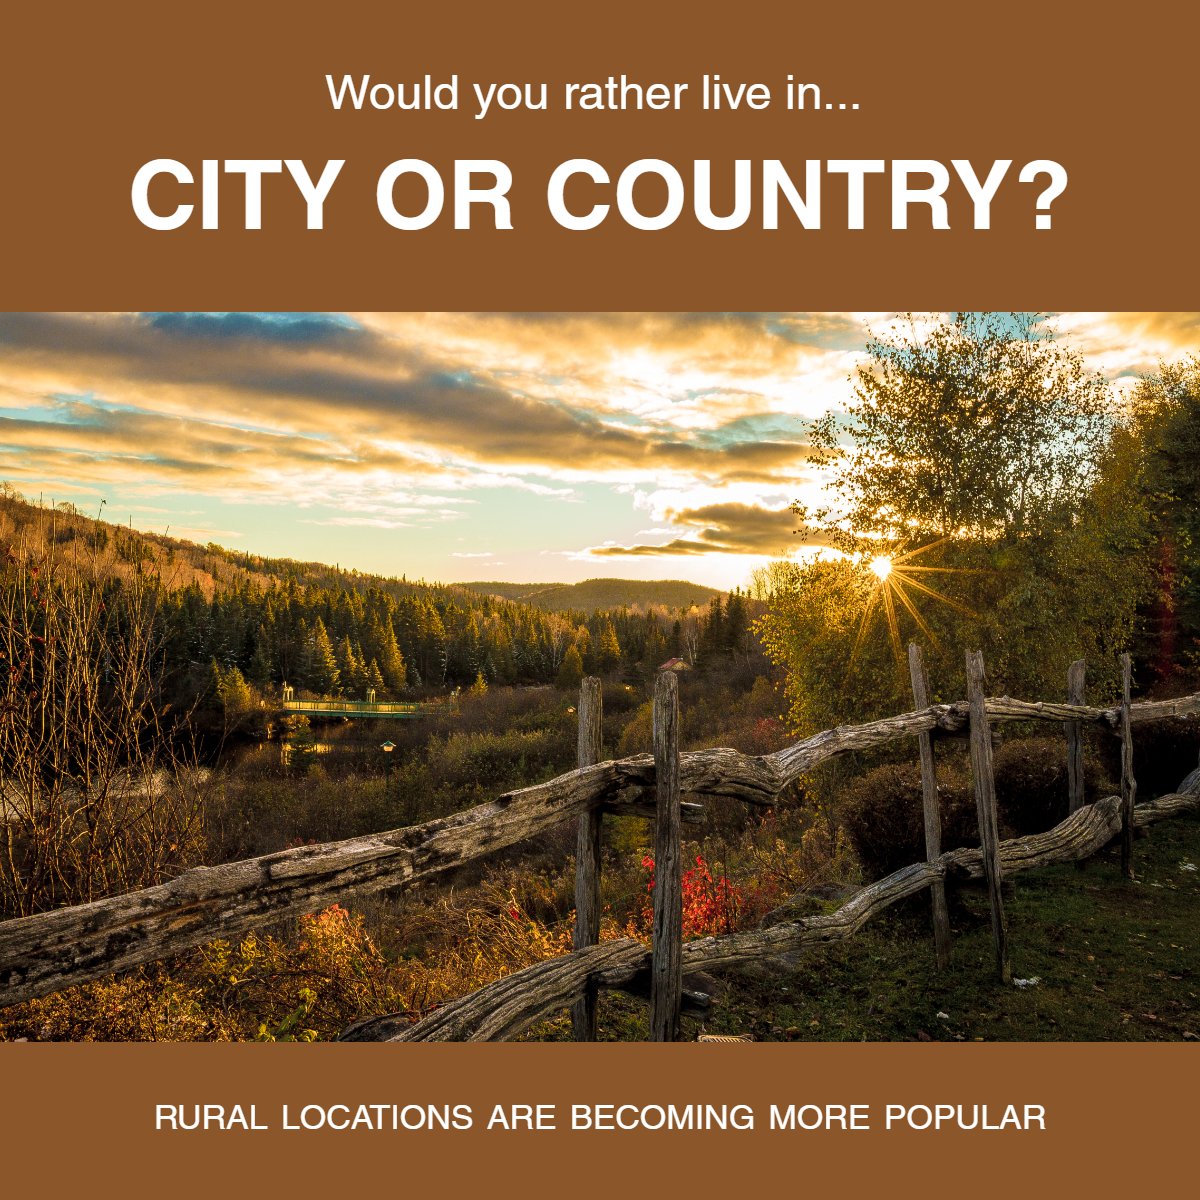 Would you rather live in the city or country? 🏙️🌄

#wouldyourather #cityorcountry #citylights #realestatequestion #realestate
 #PalmSprings #PalmDesert #CathedralCity #RanchoMirage #Luxury #RealEstate #HomeBuying #HomeSelling #Realty #Househunting